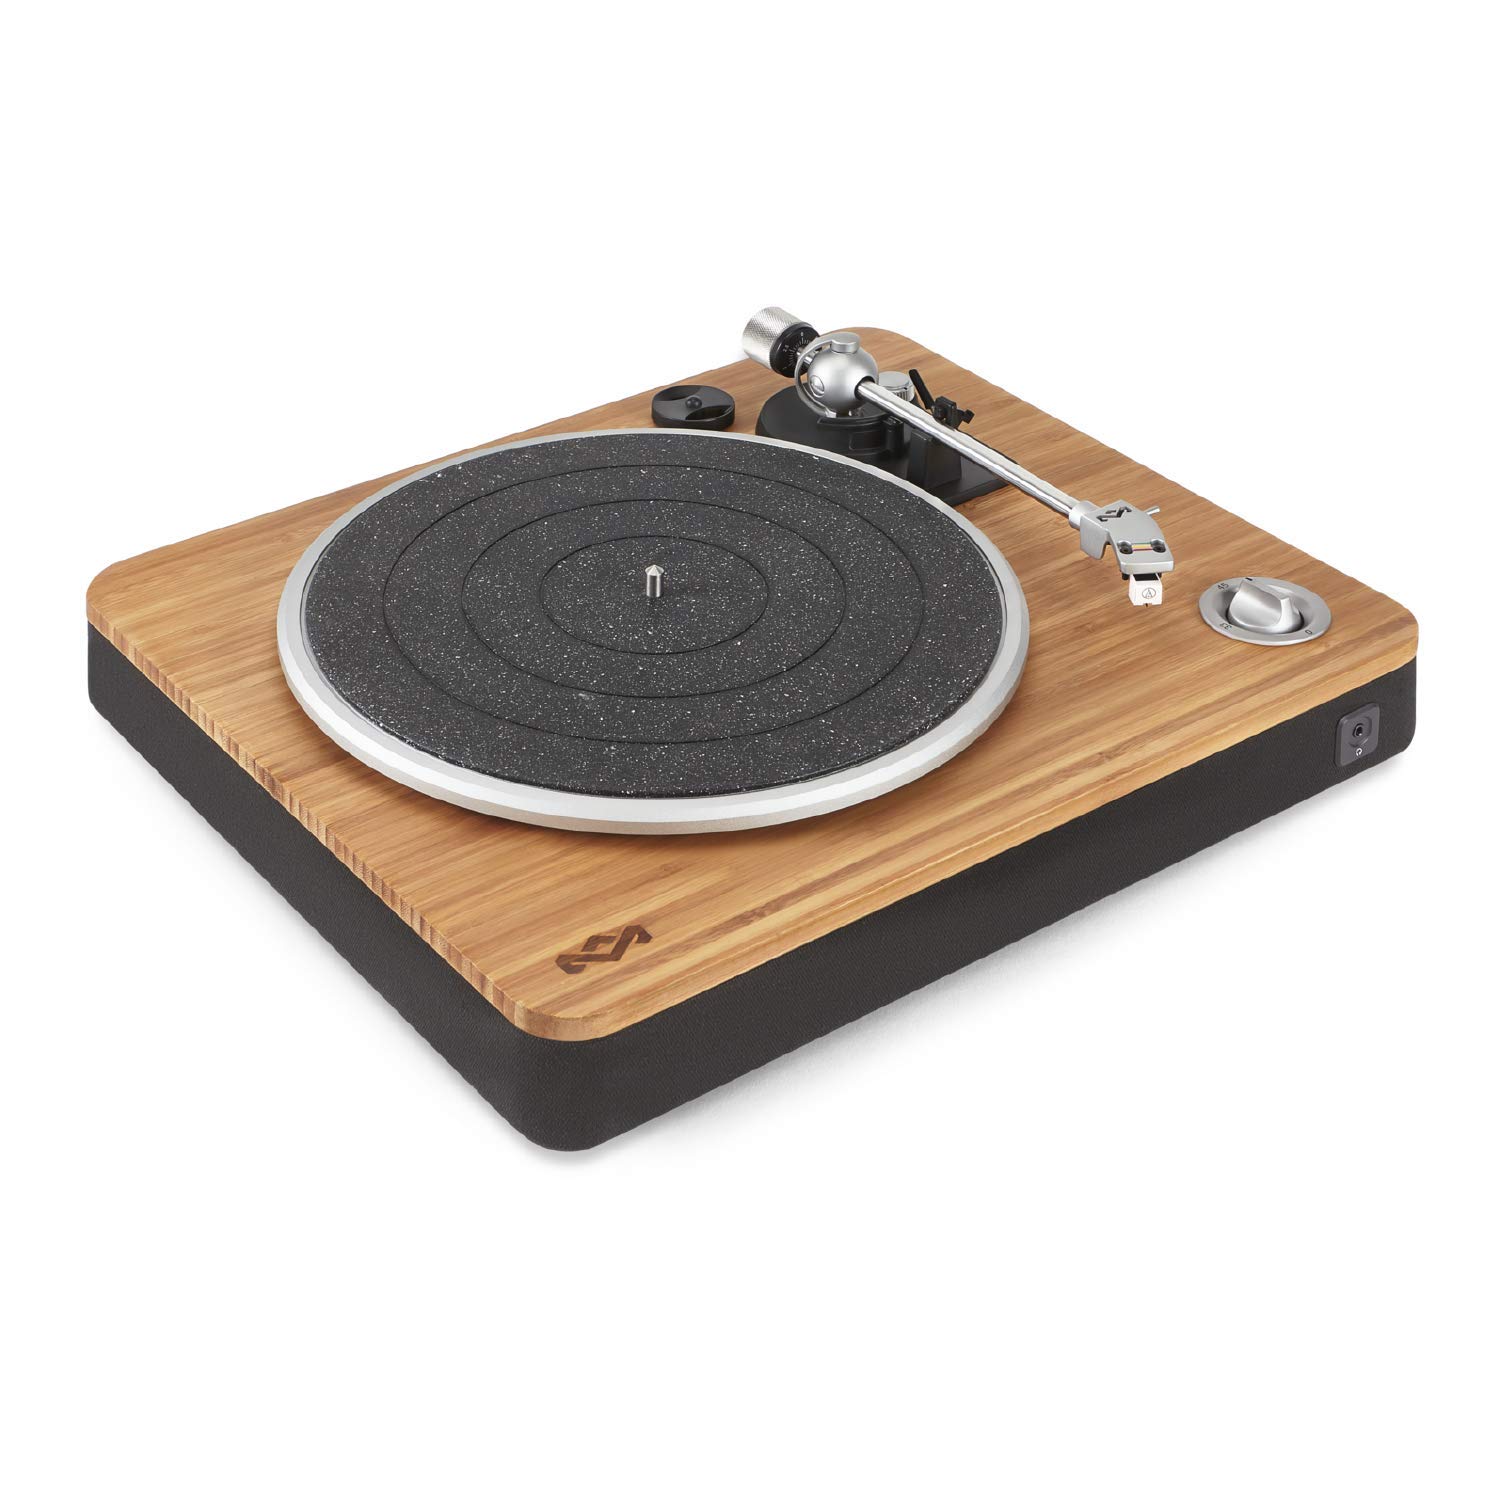 House of Marley Stir It Up Turntable: Vinyl Record Play...